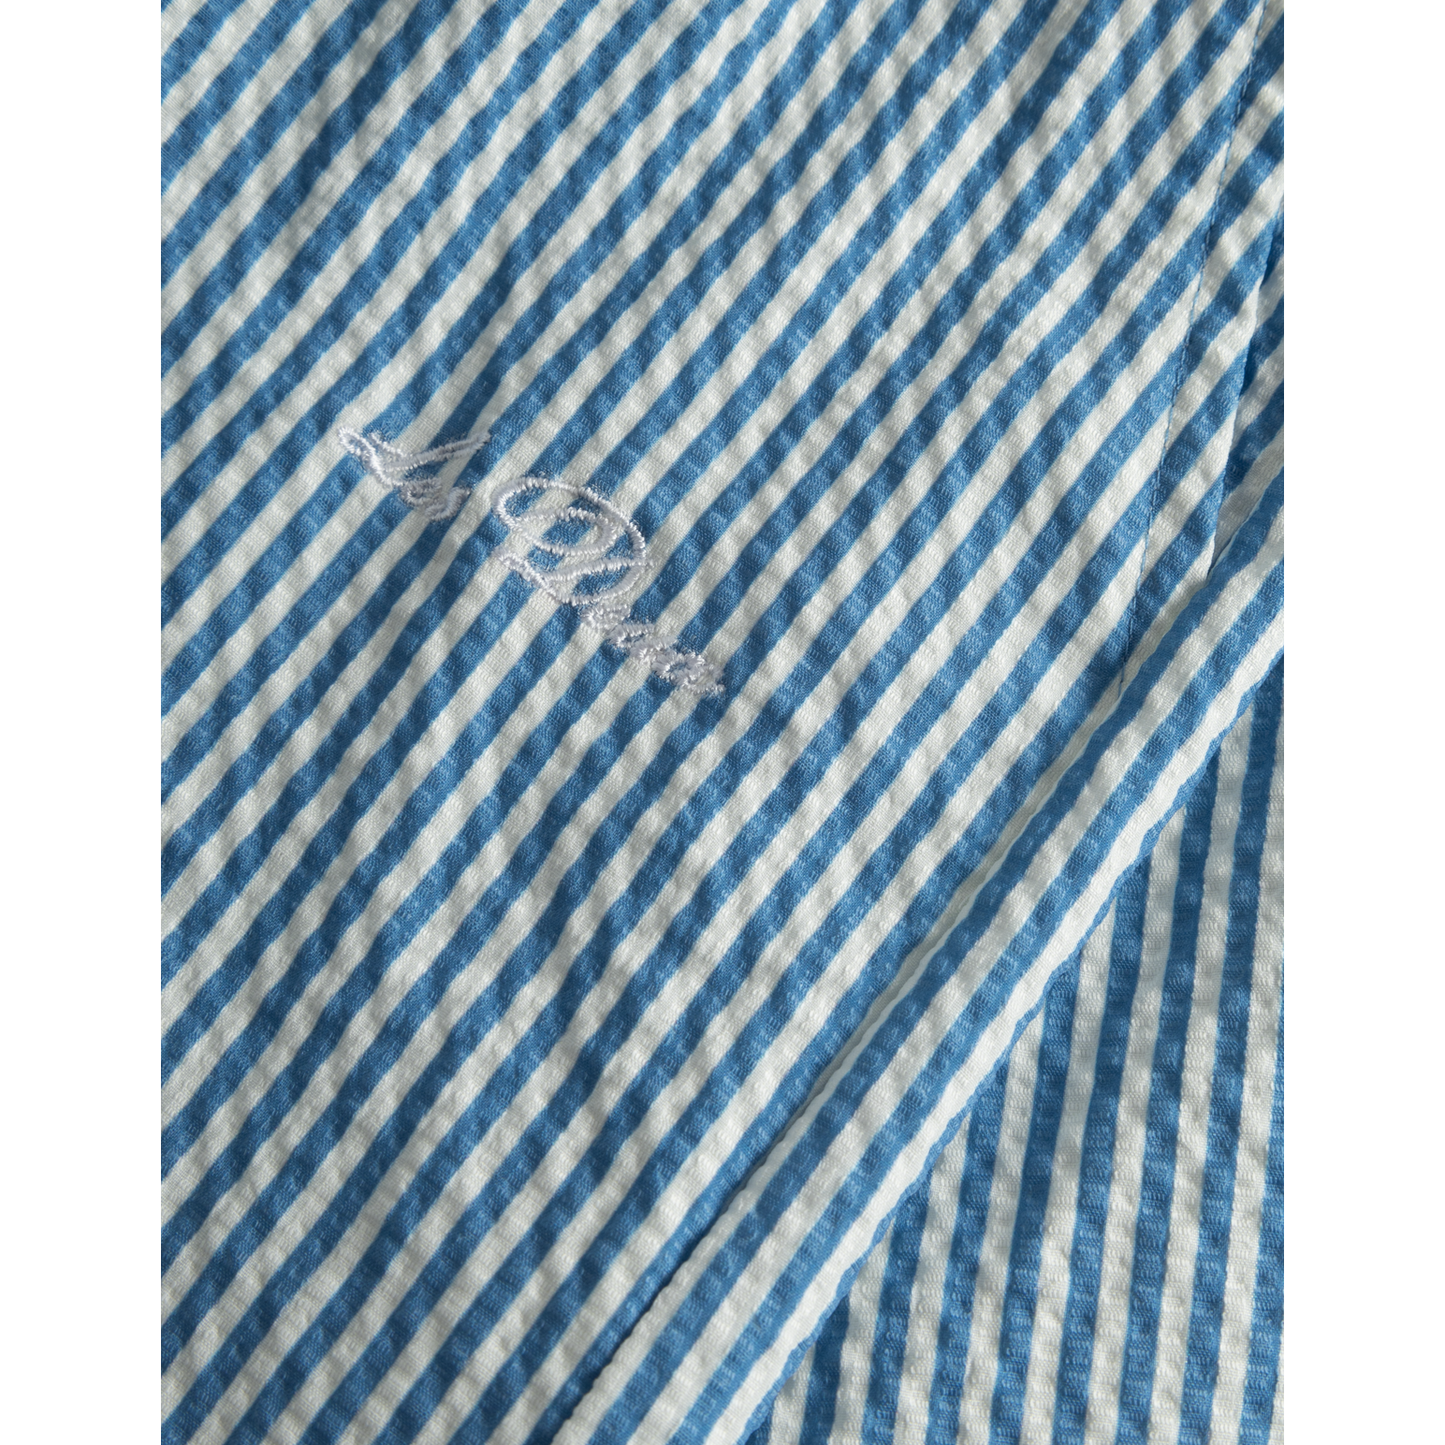 Blue and white Stan Stripe Seersucker Swim Shorts by Les Deux with a small embroidered logo detail.